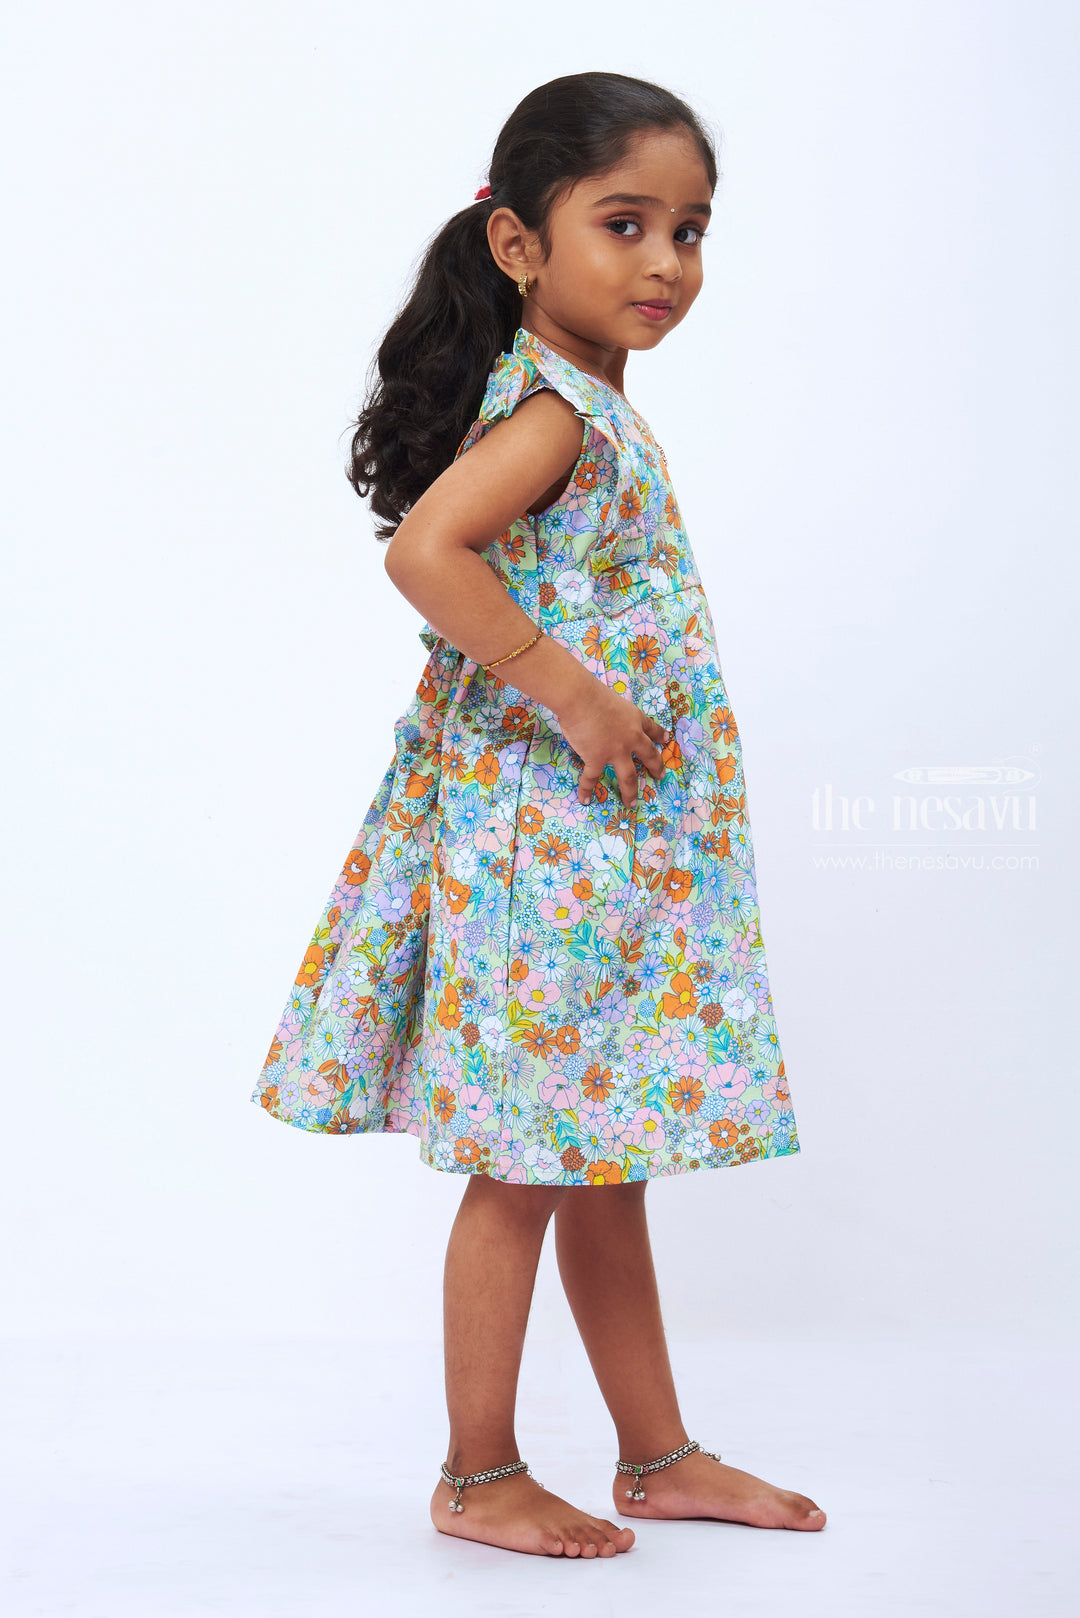 The Nesavu Girls Cotton Frock Blossoming Meadow Cotton Frock Frill Accent & Pleated Detail for Girls Nesavu Girls Floral Pleated Dress | Summer Blossom Cotton Frock with Frills | The Nesavu